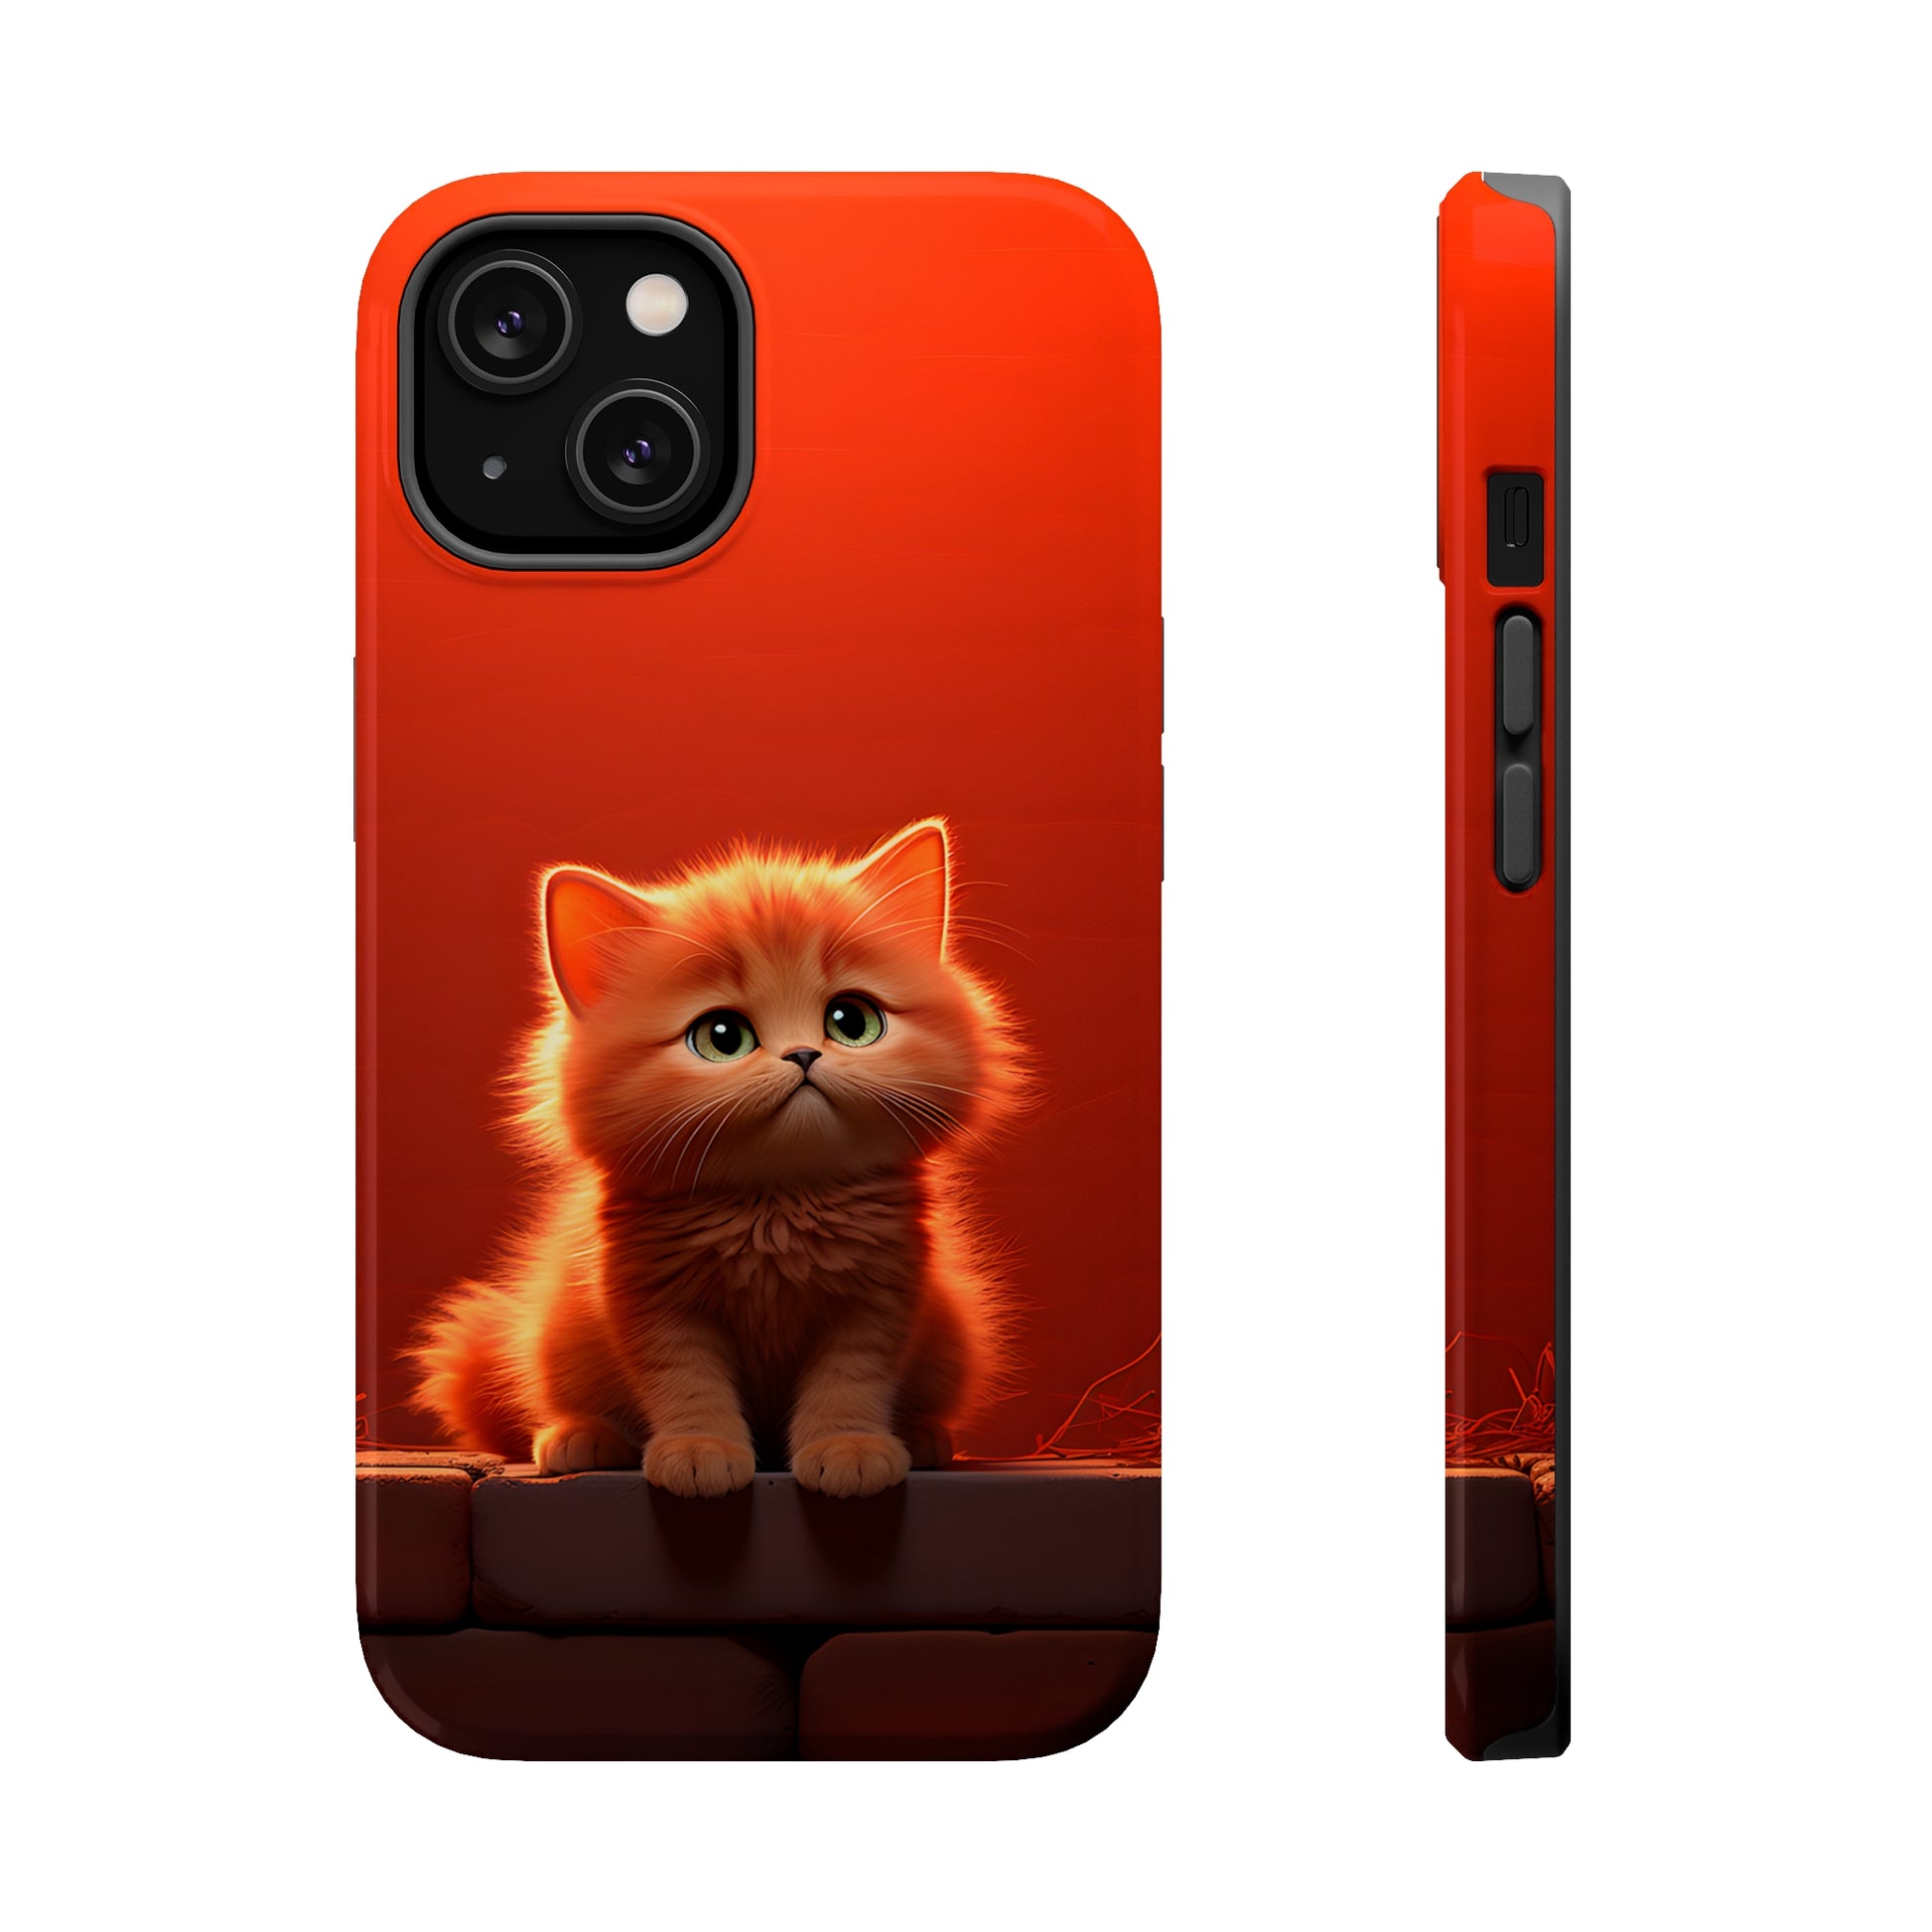 Cat Sitting On a Wall MagSafe Durable Case: Style Meets Protection 📱✨
Upgrade your device with Rima Gallery's Cat Sitting On a Wall MagSafe Durable Case. This case -Wall (iPhone MagSafe Case)